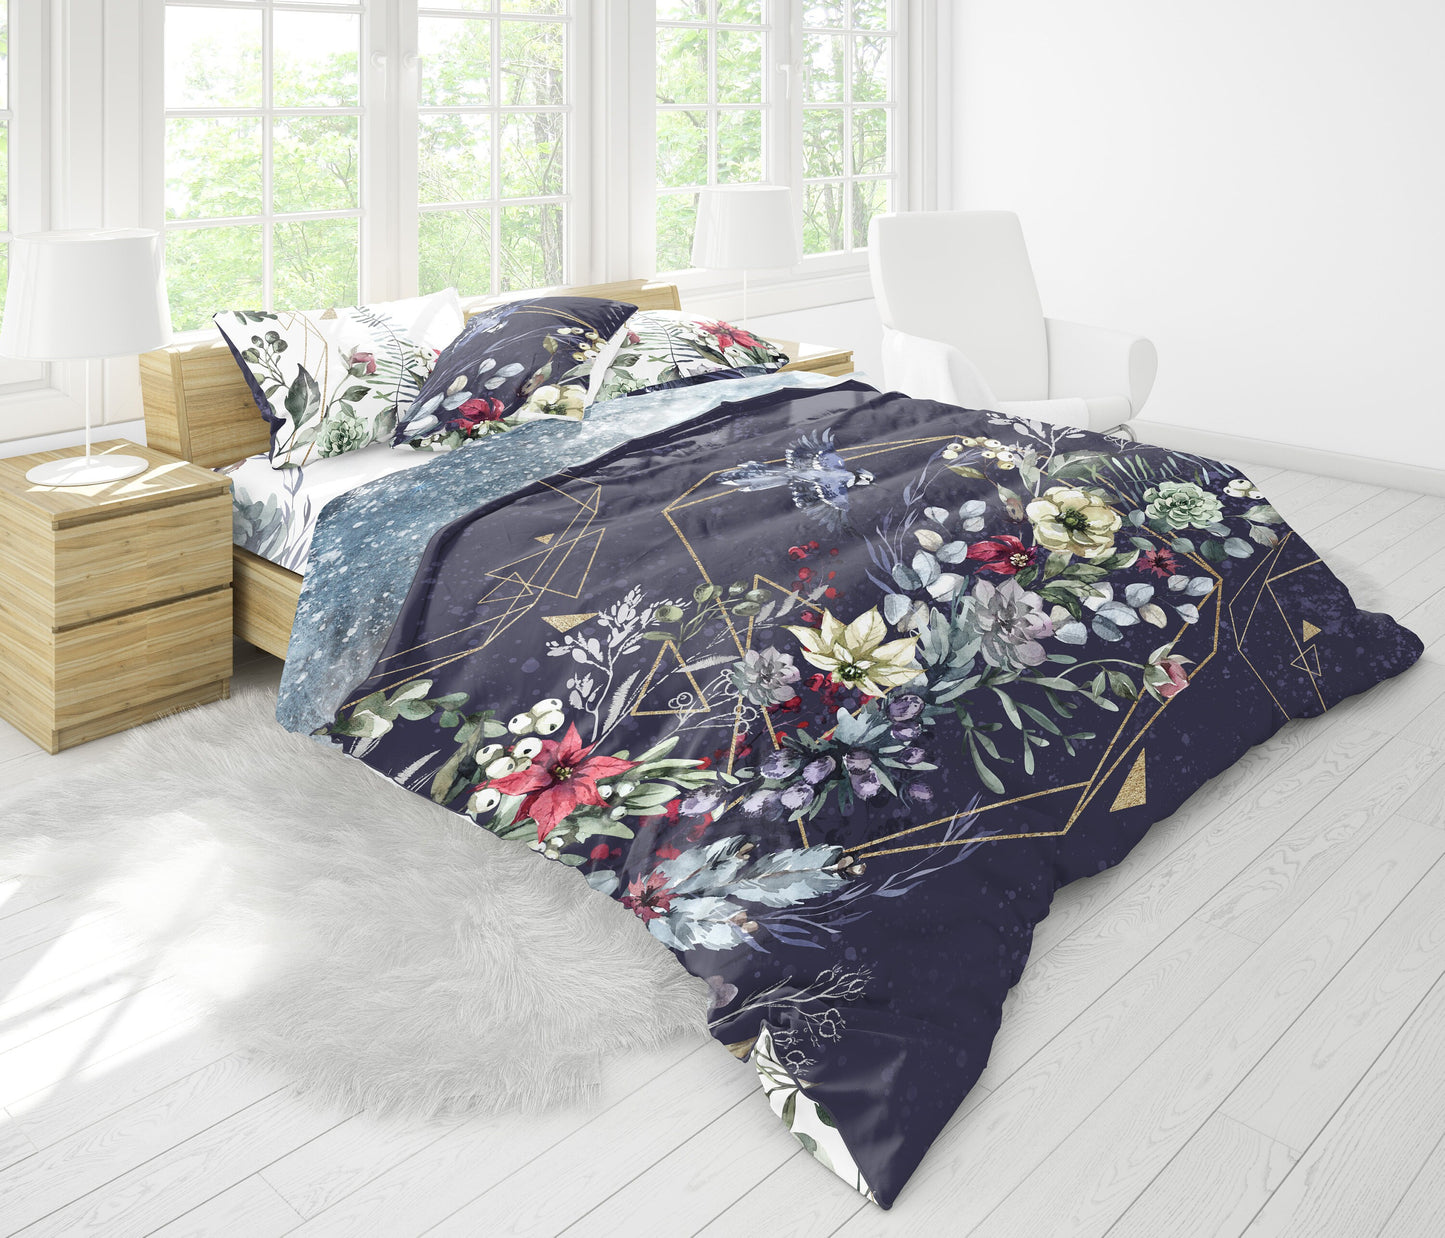 Magic floral design of the new Day with Christmas deer Personalised reversible gift Bedding set • Cotton • AU, EU, USA, queen, king